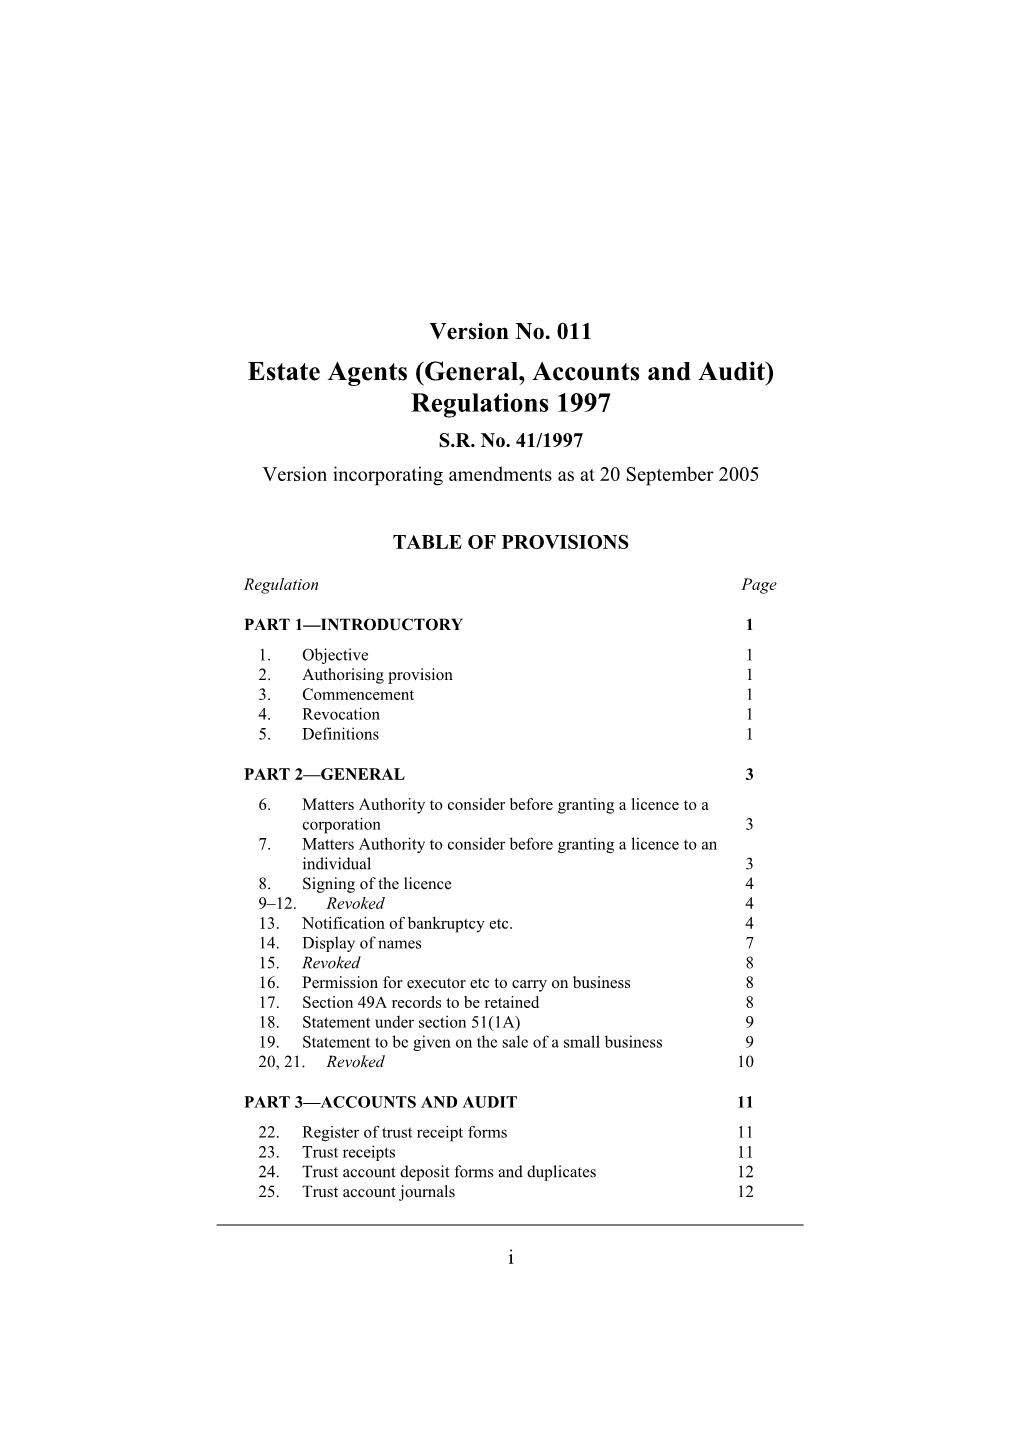 Estate Agents (General, Accounts and Audit) Regulations 1997